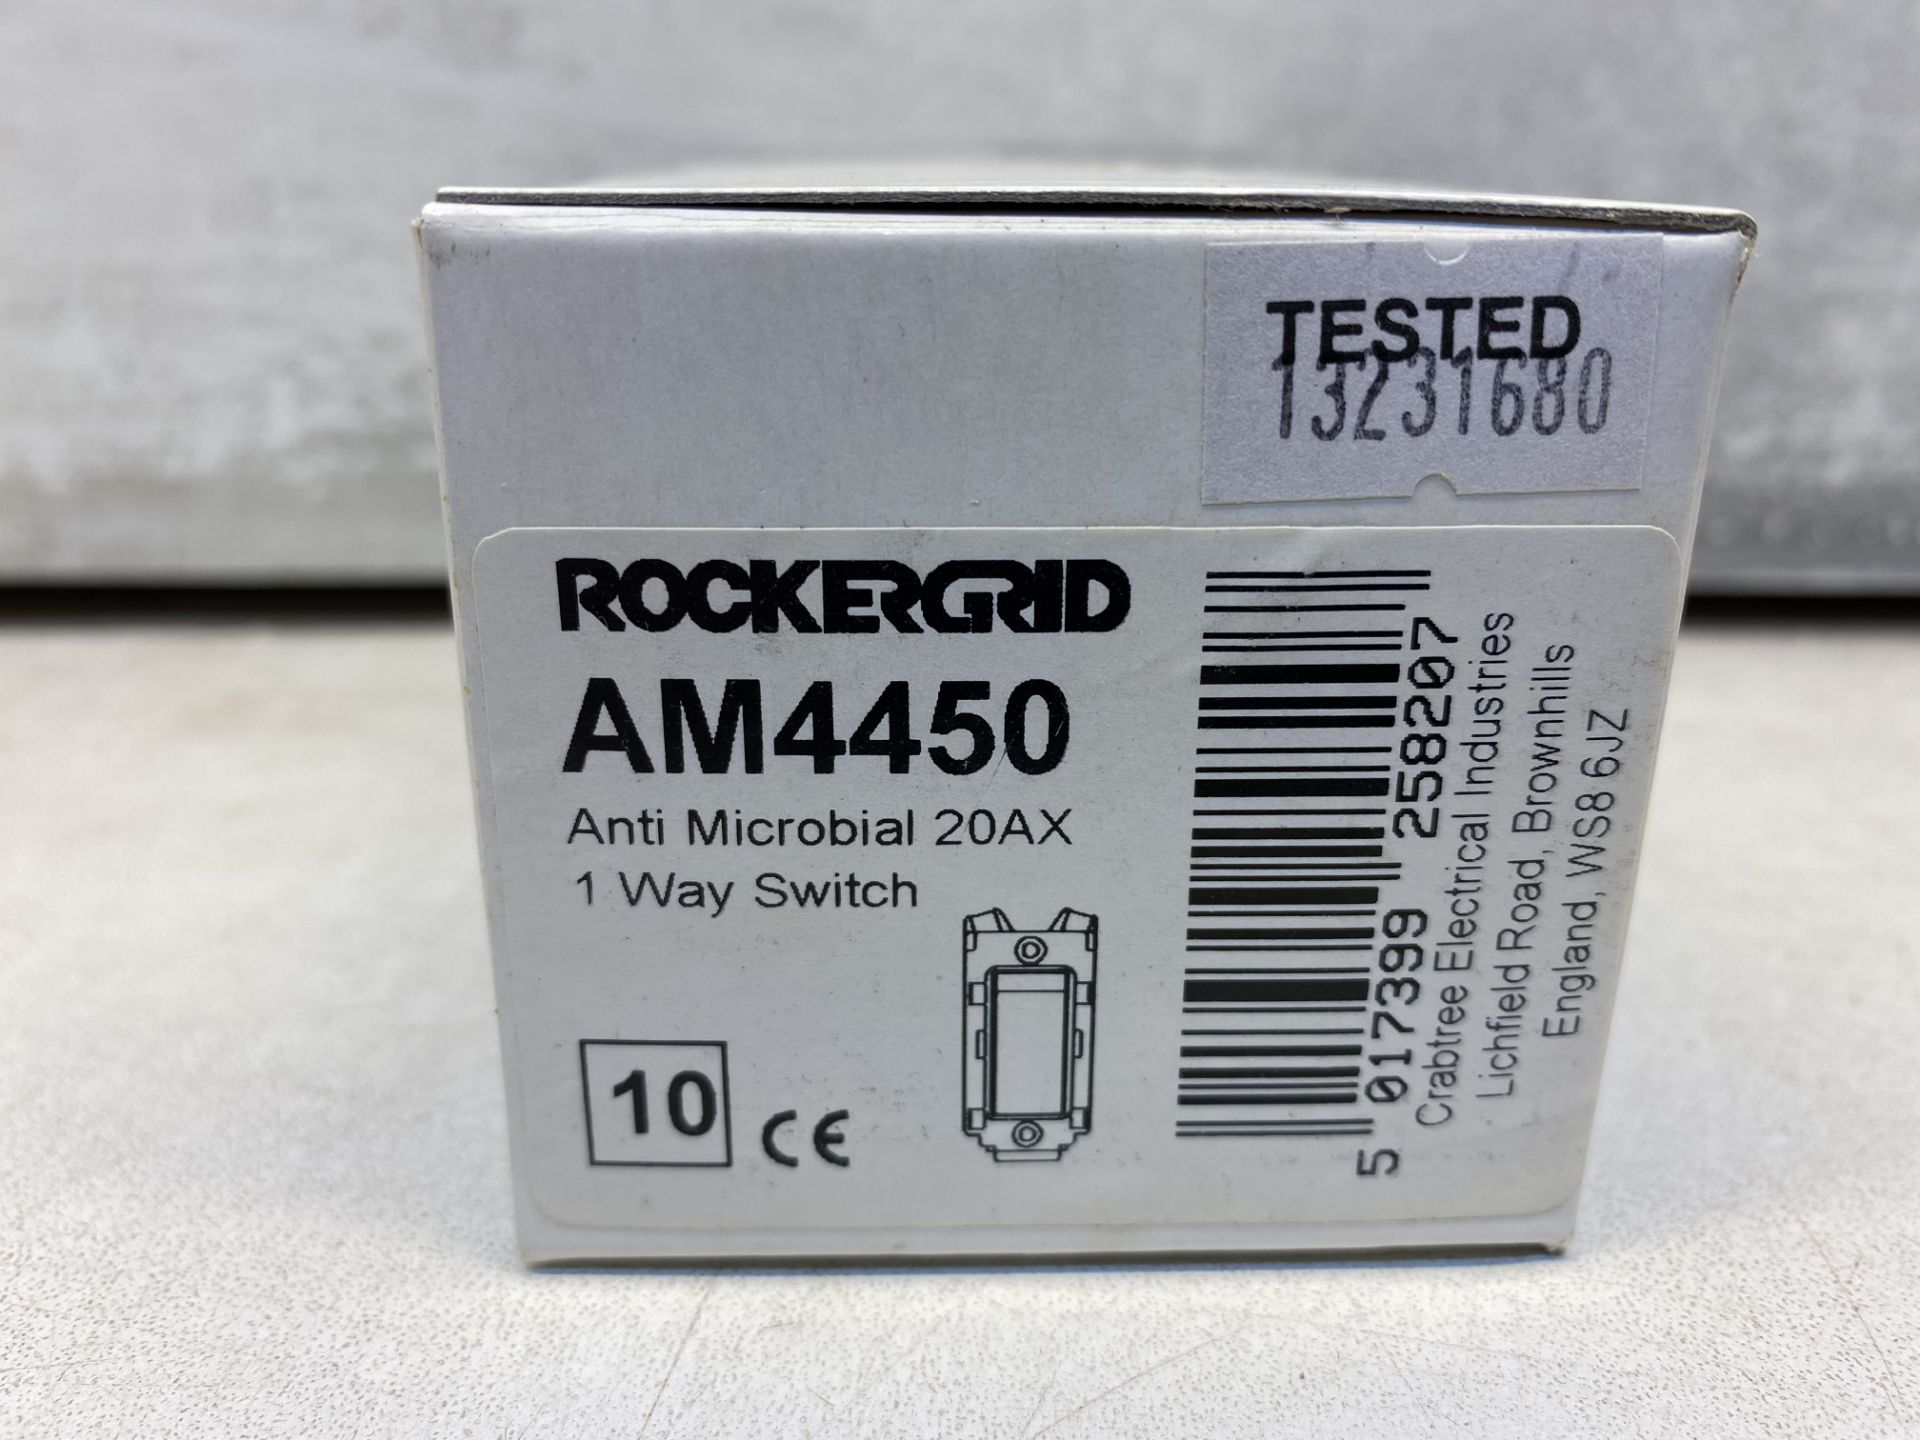 90 x Rockergrid AM4450 Anti Microbial 20AX 1 way Switches - Image 4 of 4